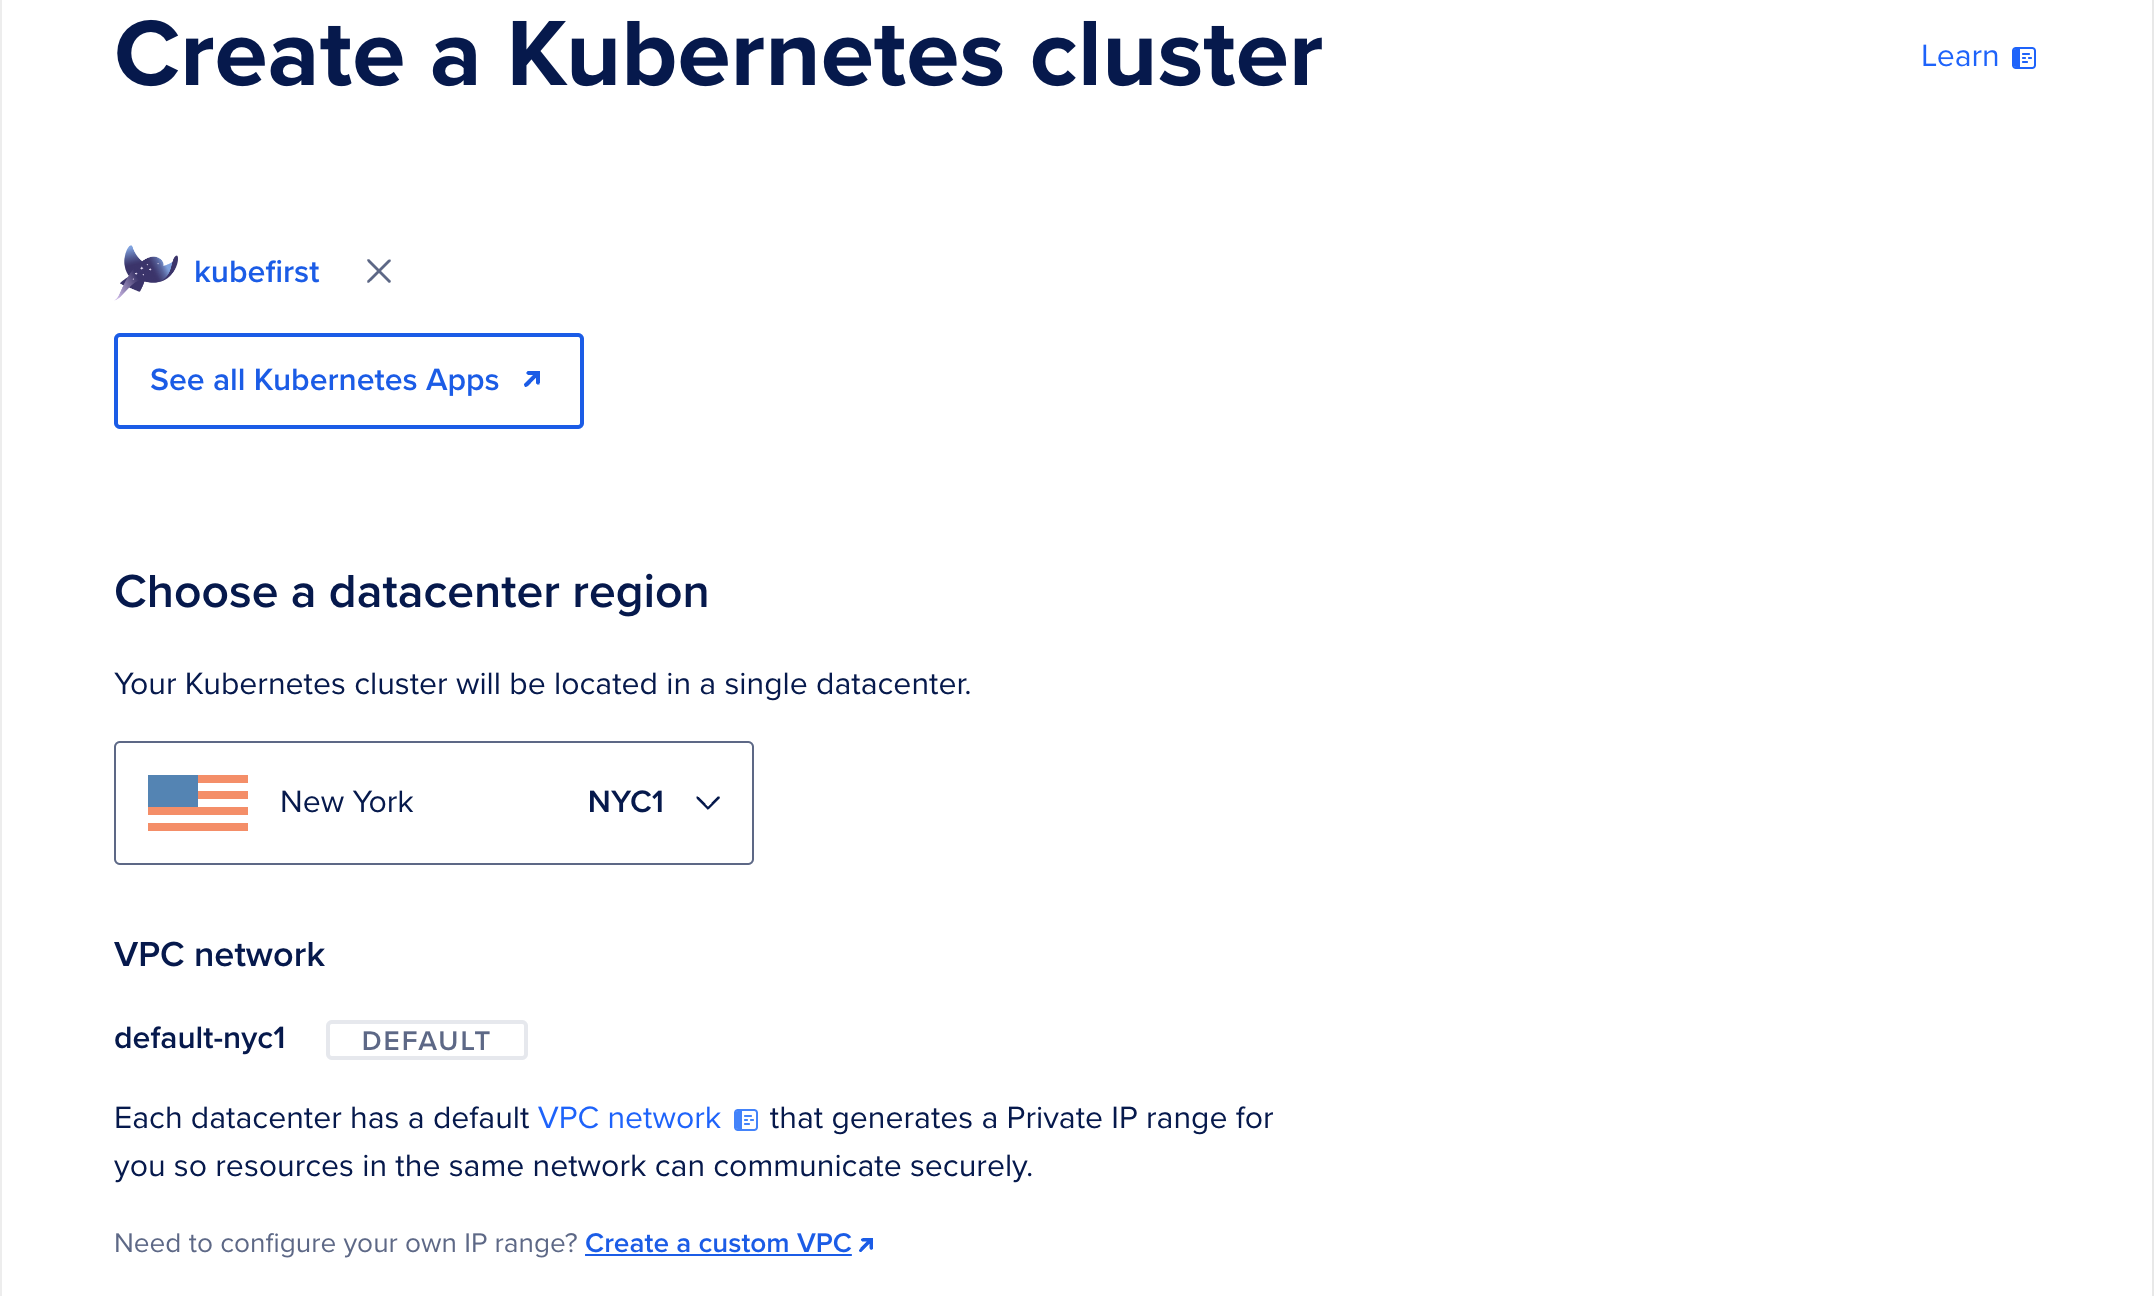 Instant Kubernetes GitOps From the DigitalOcean Marketplace